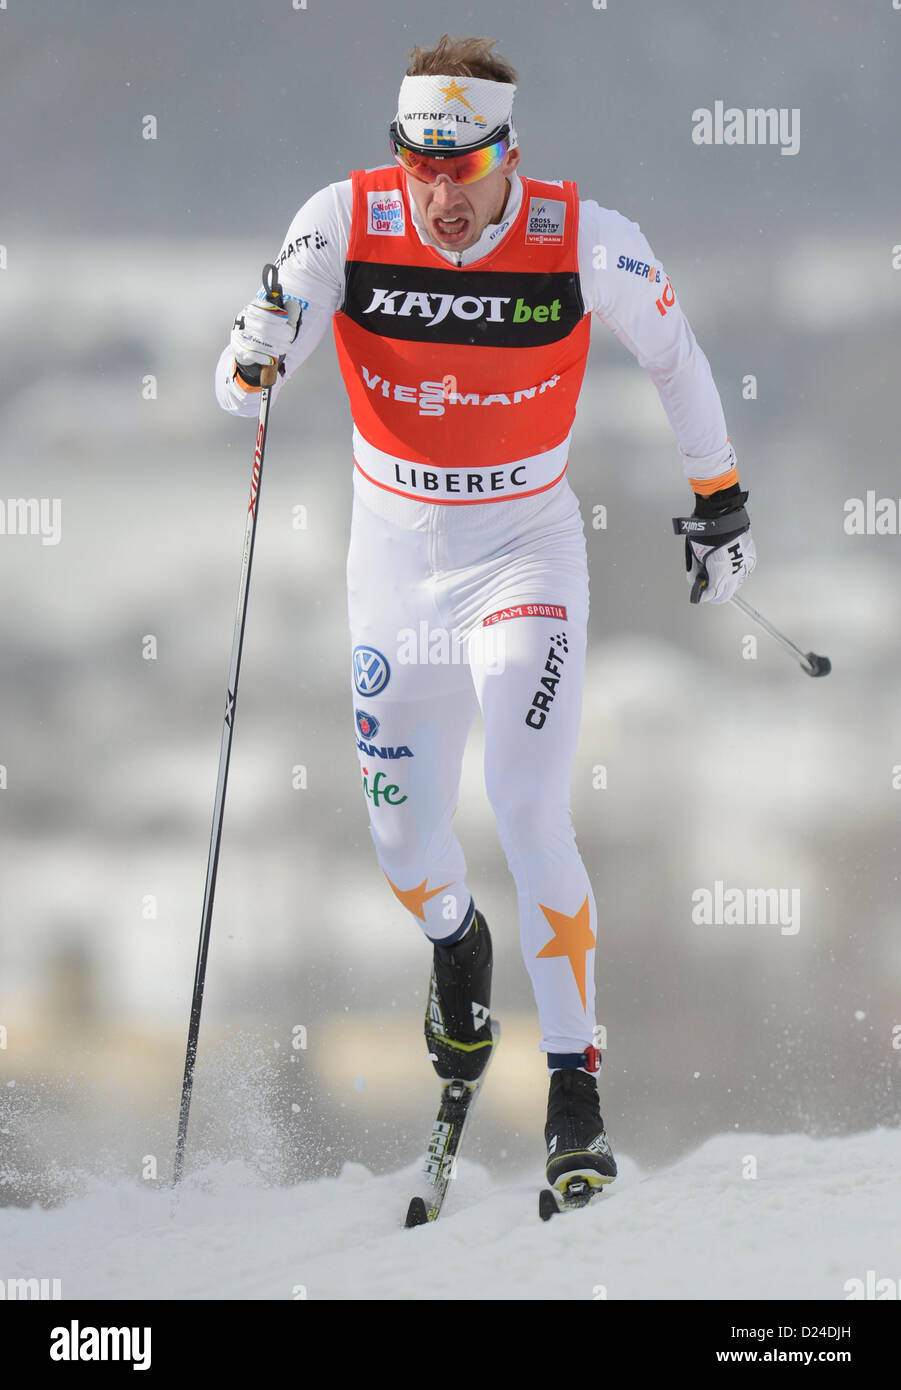 FIS Cross-Country Skiing World Cup, 2012-13, sprint in classic style, men, second placed Emil Jonsson from Sweden, is seen in Liberec, Czech Republic, January 12, 2013. (CTK Photo/Michal Kamaryt) Stock Photo